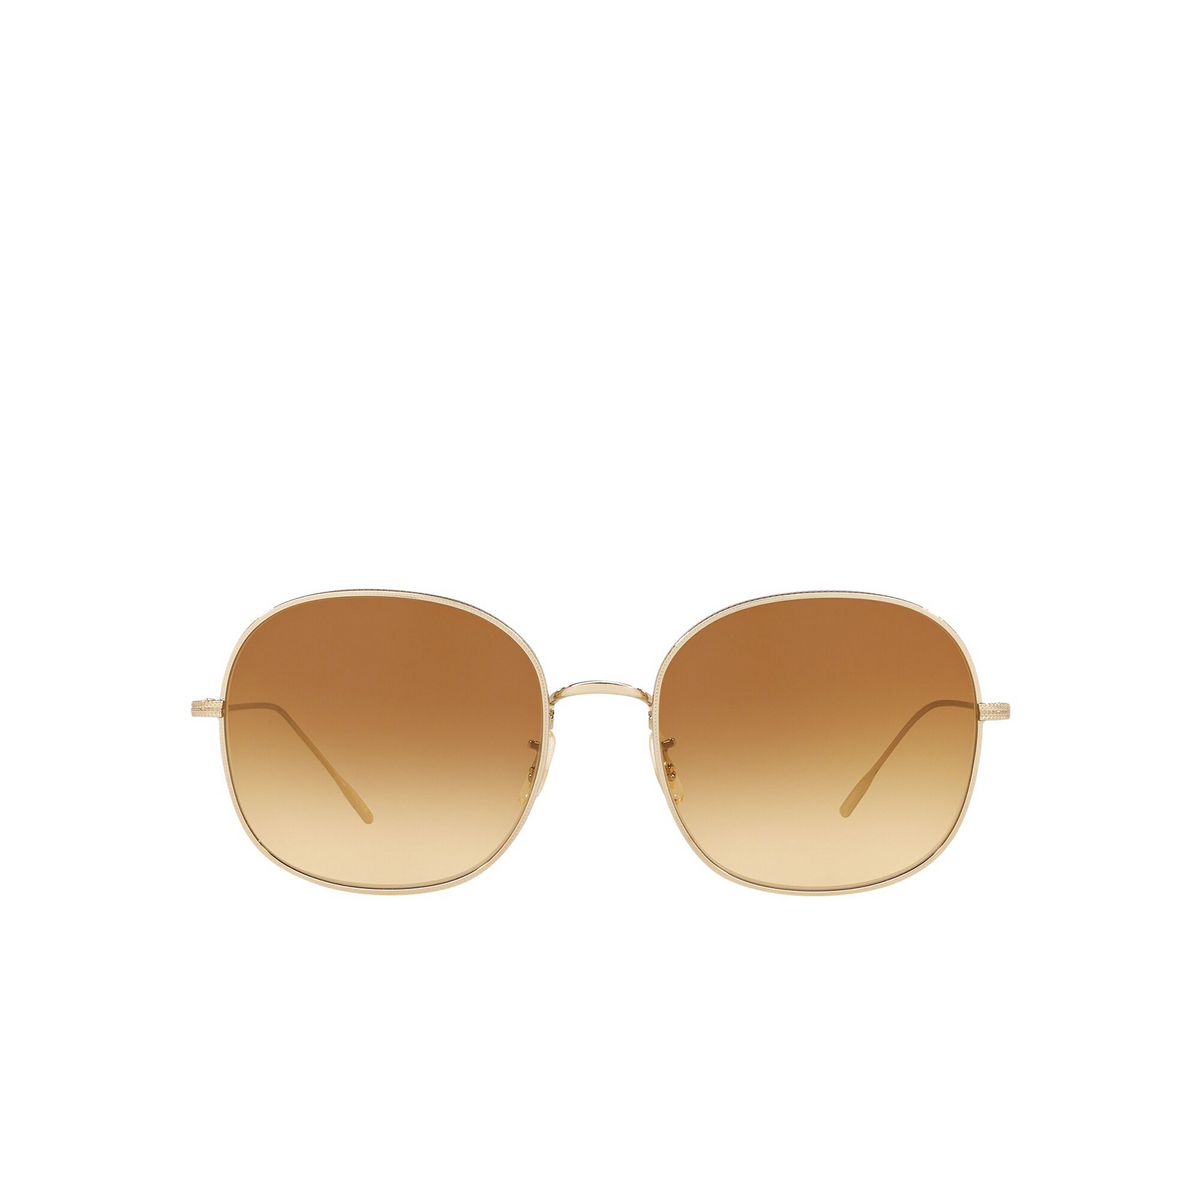 Oliver Peoples® Round Sunglasses: Mehrie OV1255S color Soft Gold 50352L - front view.